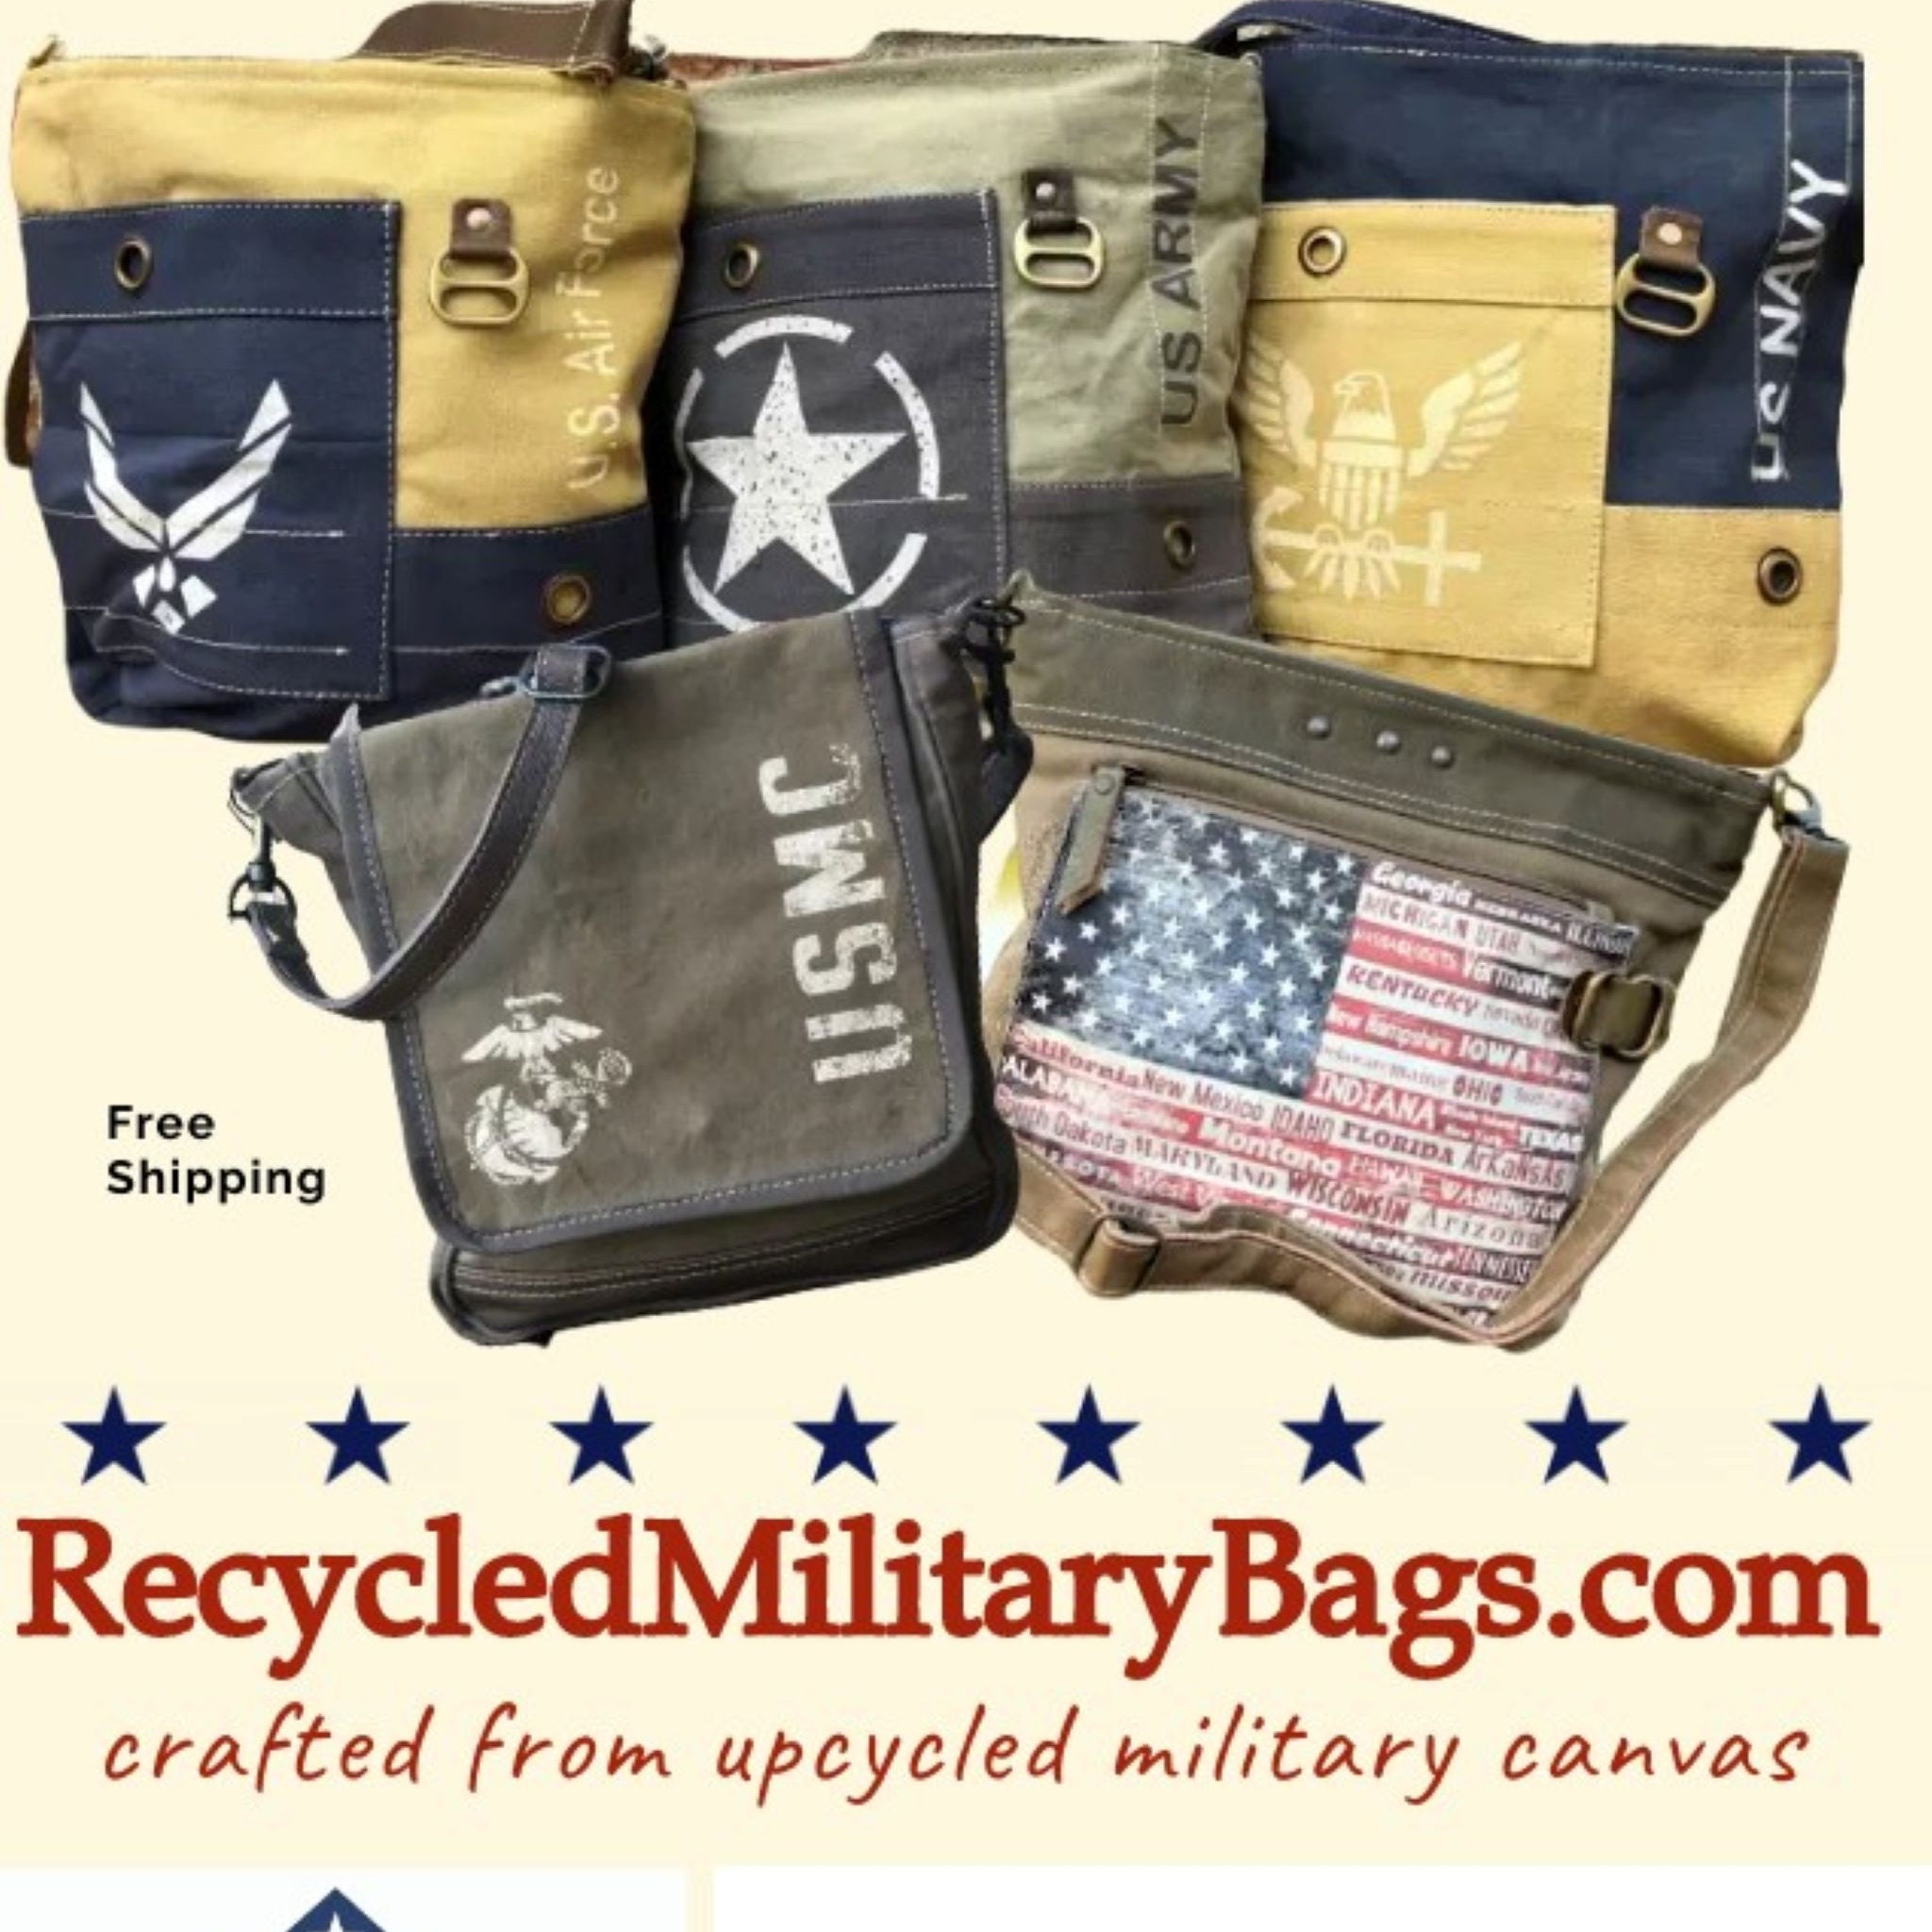 RecycledMilitaryBags